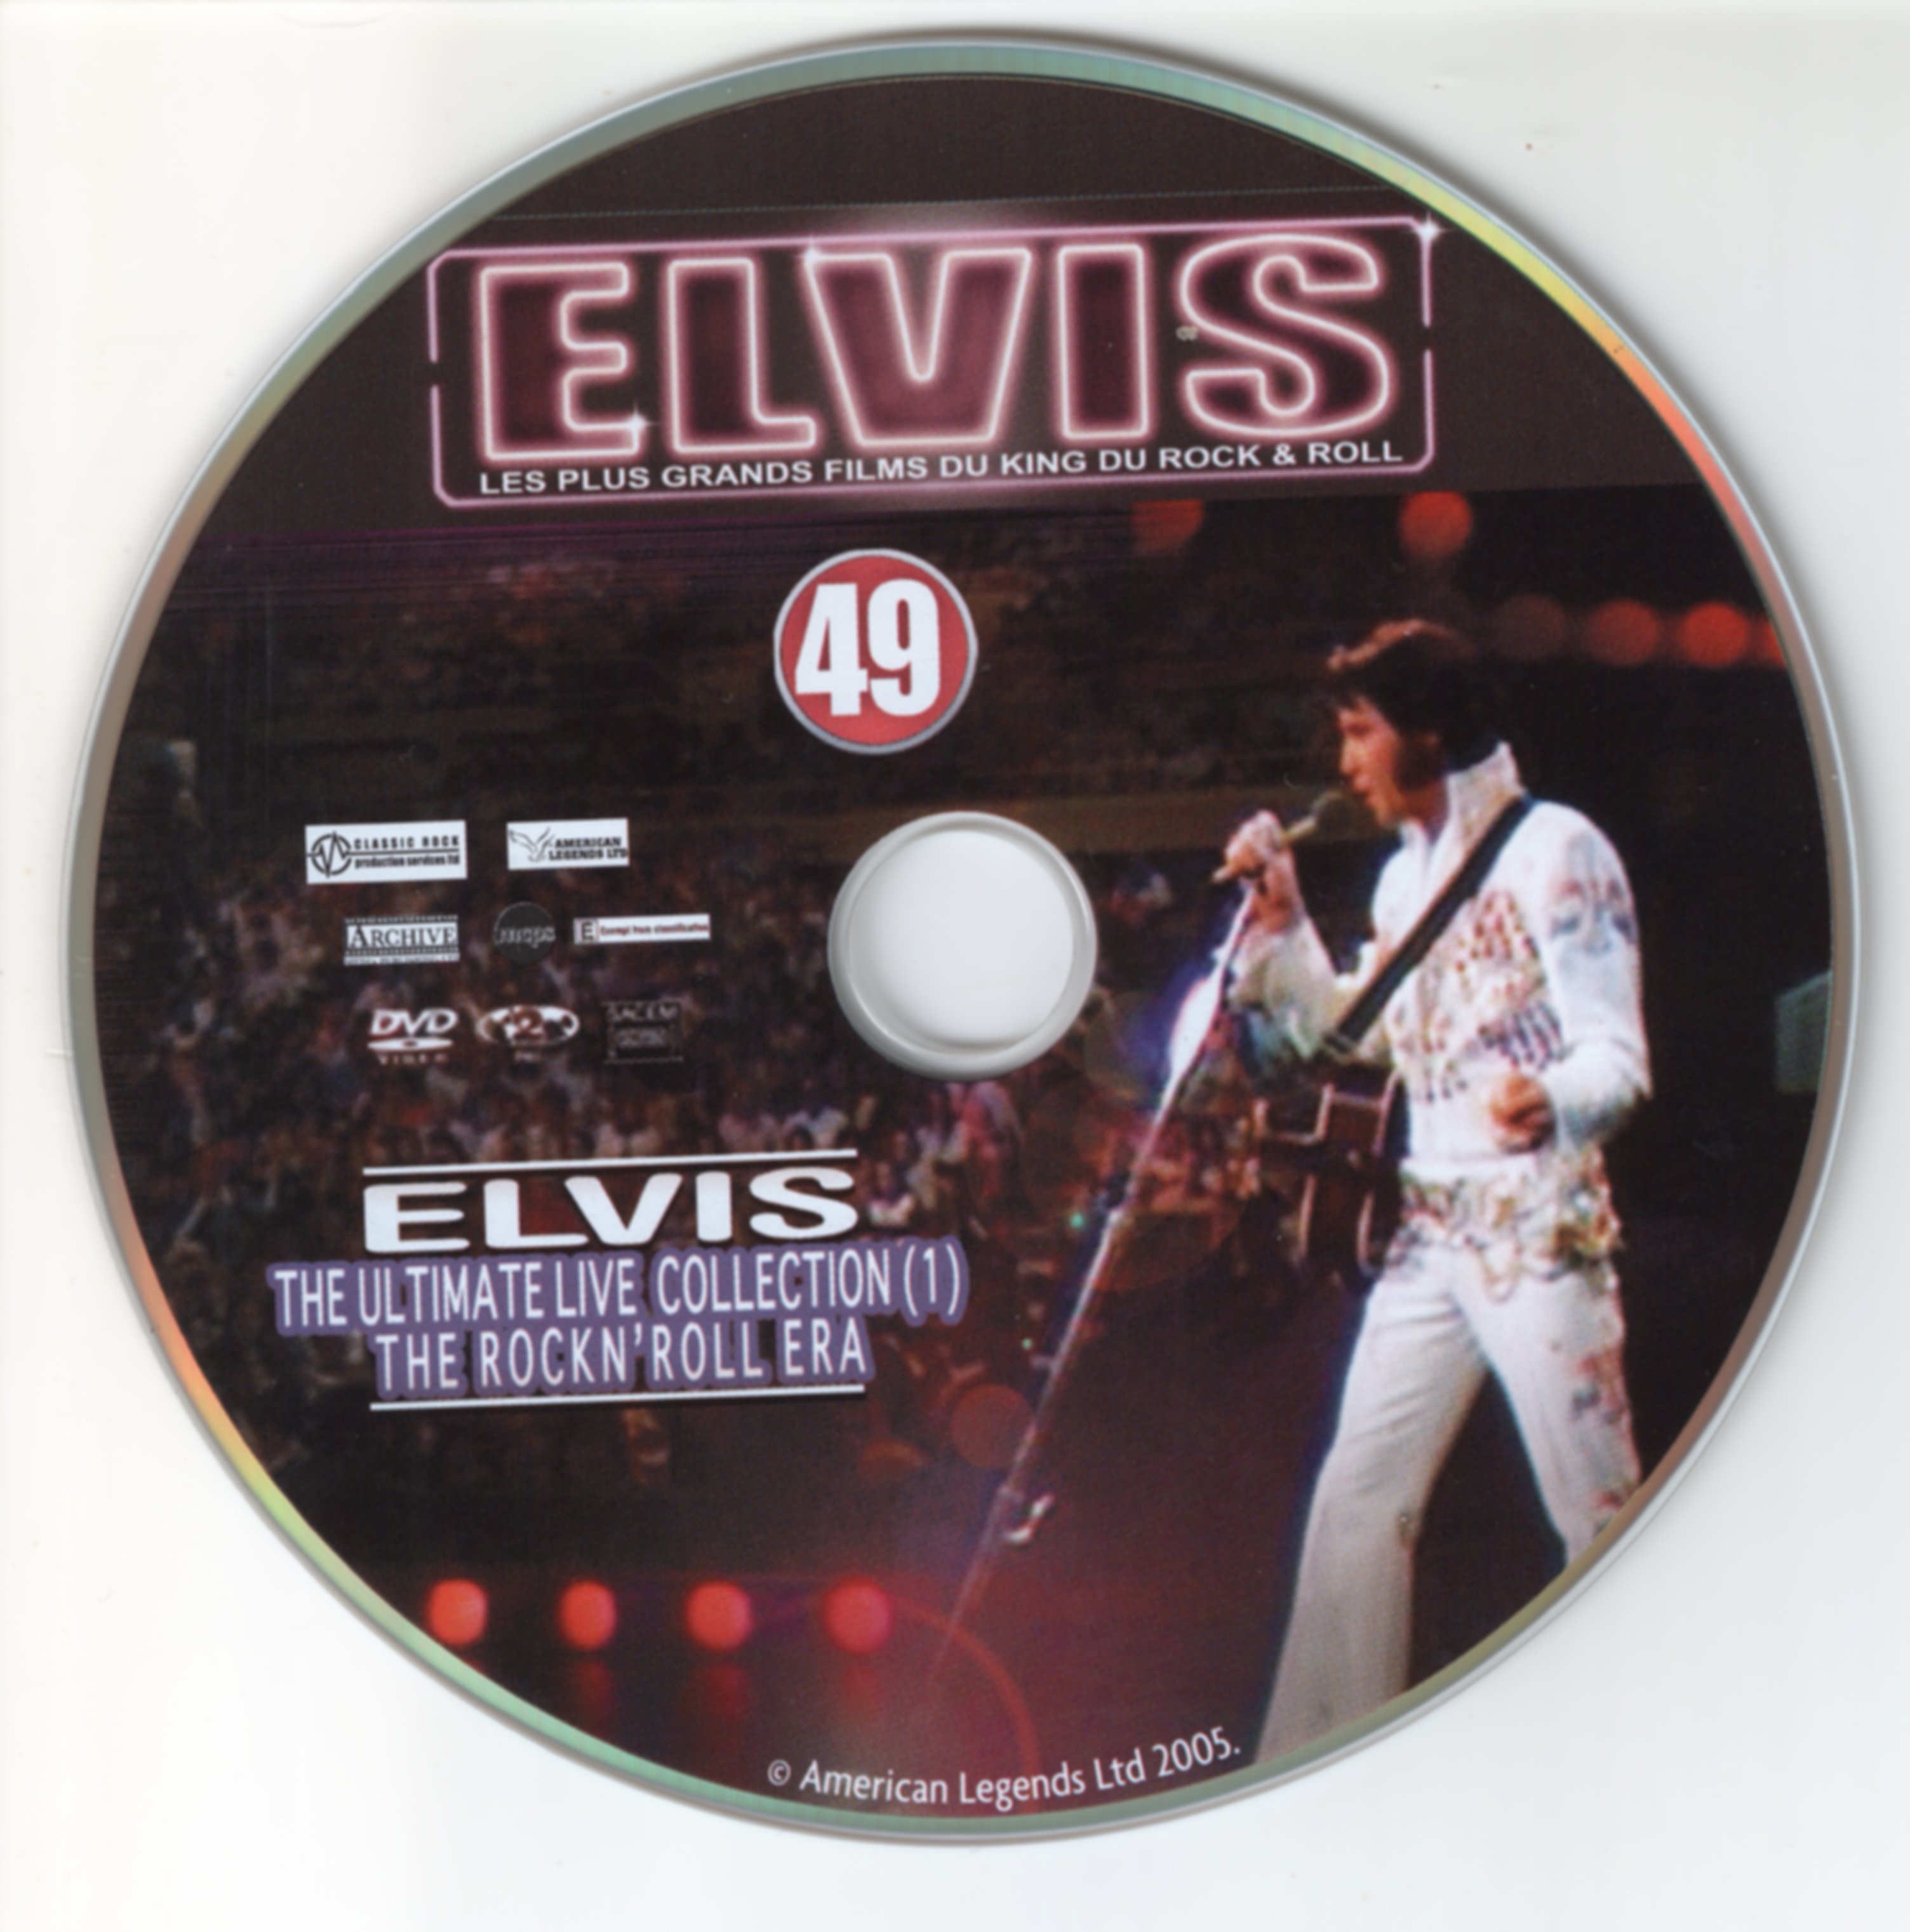 Elvis - The ultimate live collection 1